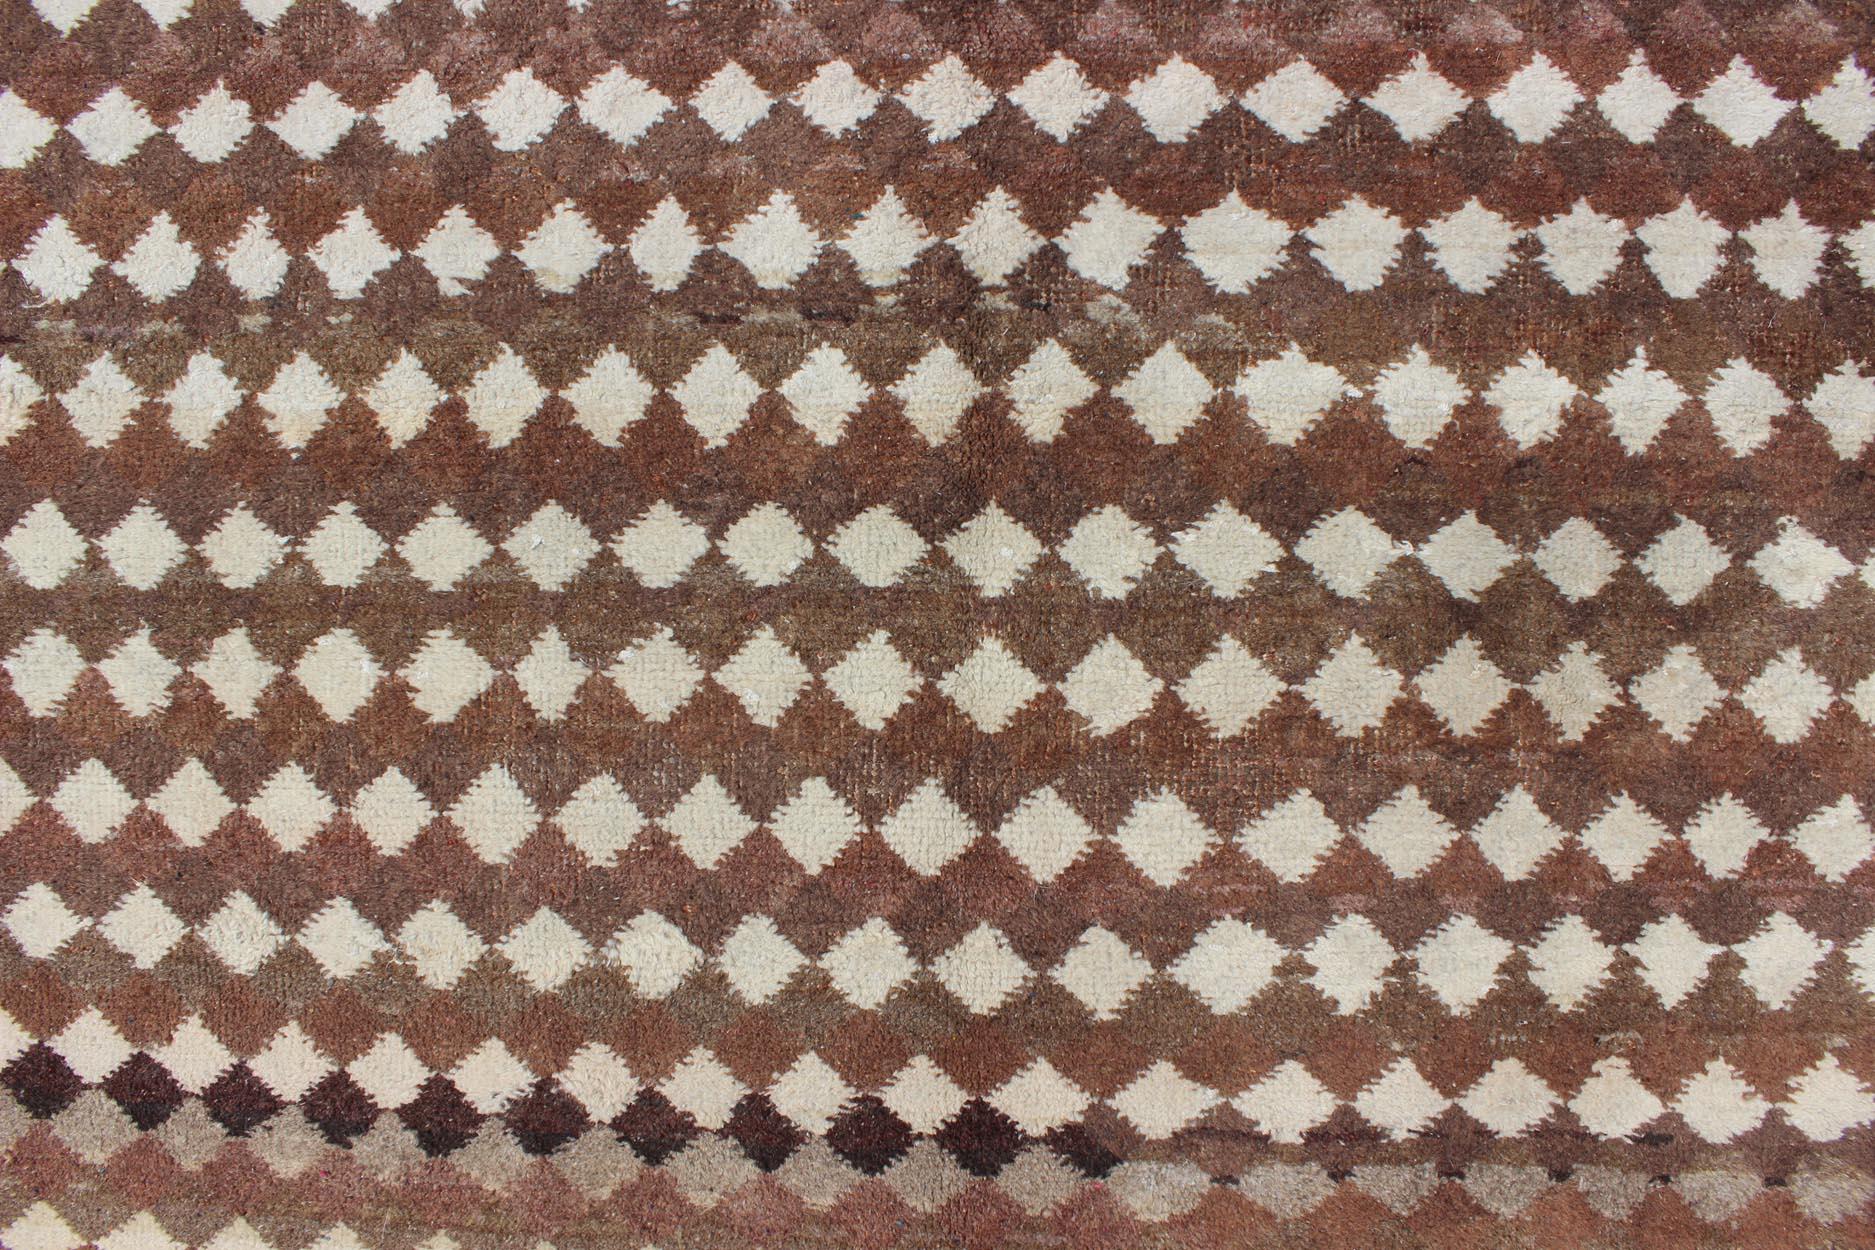 Wool Mid-Century Modern Rug with All-Over Checkerboard Pattern in Multi Brown Tones For Sale